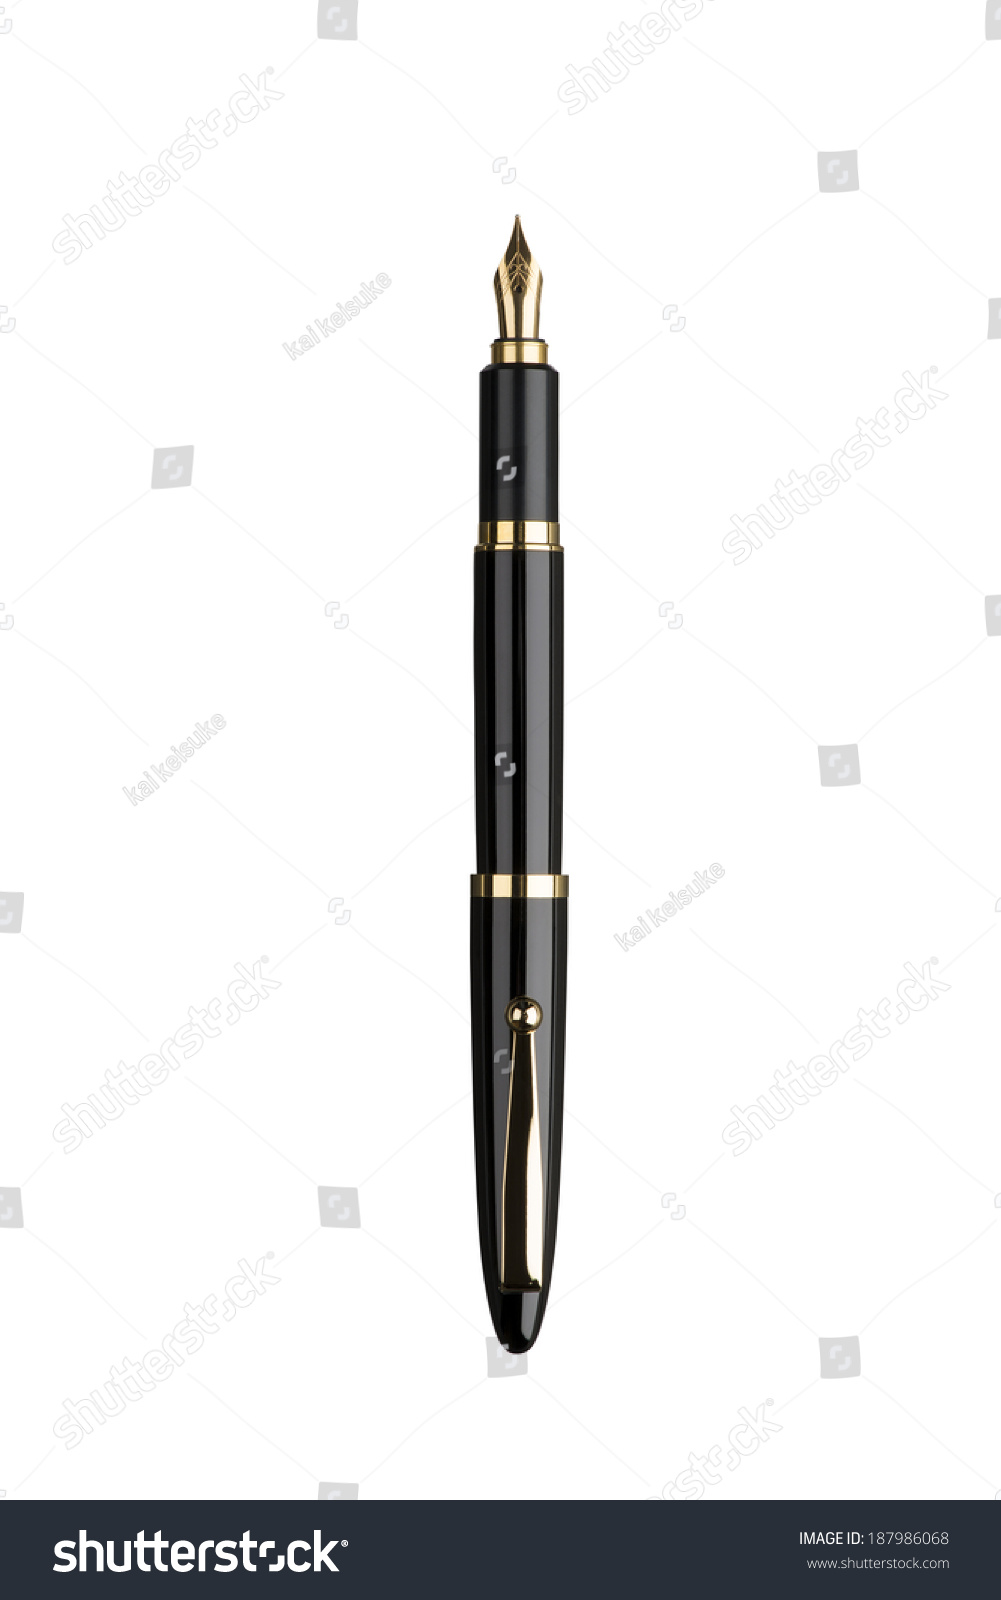 fountain pen isolated on white background #187986068